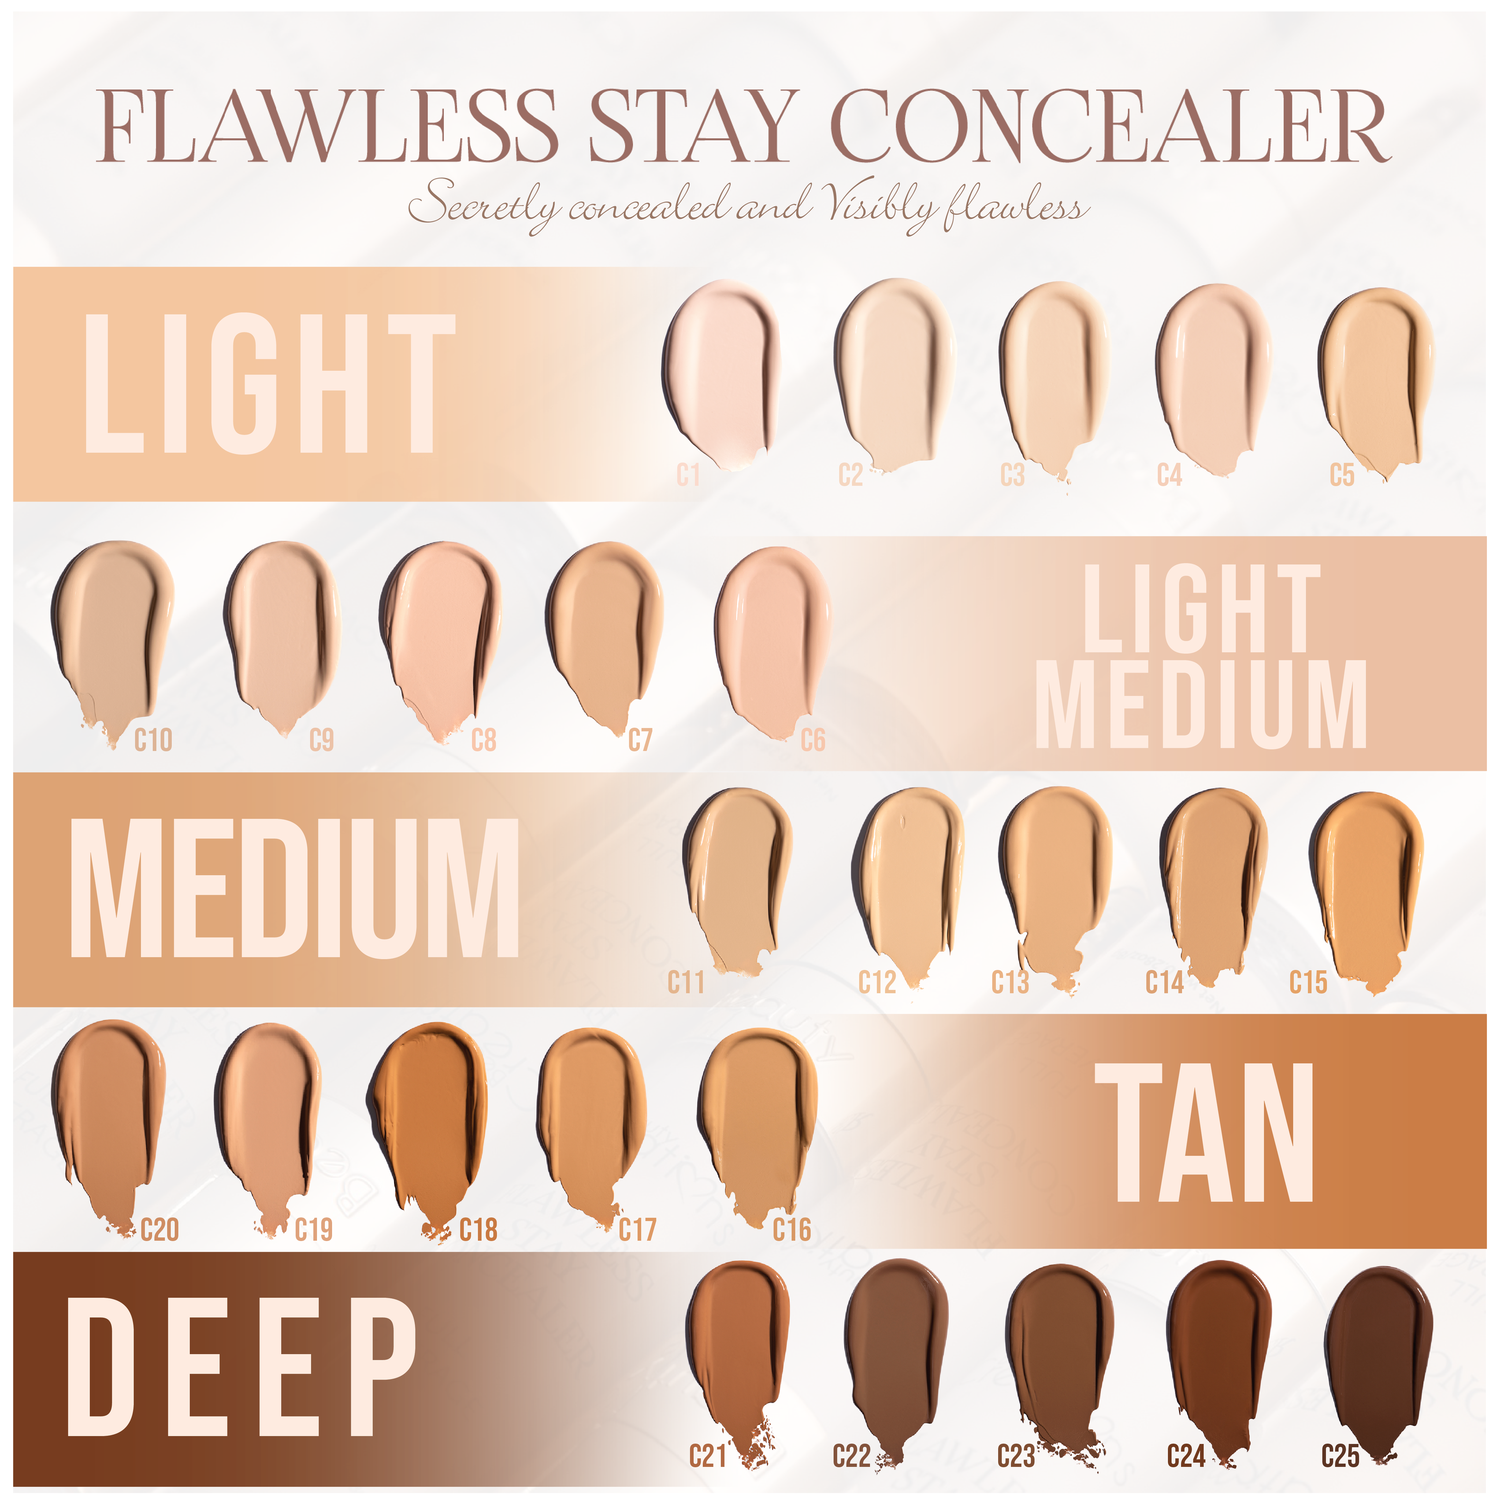 Beauty Creations - Flawless Stay Concealer